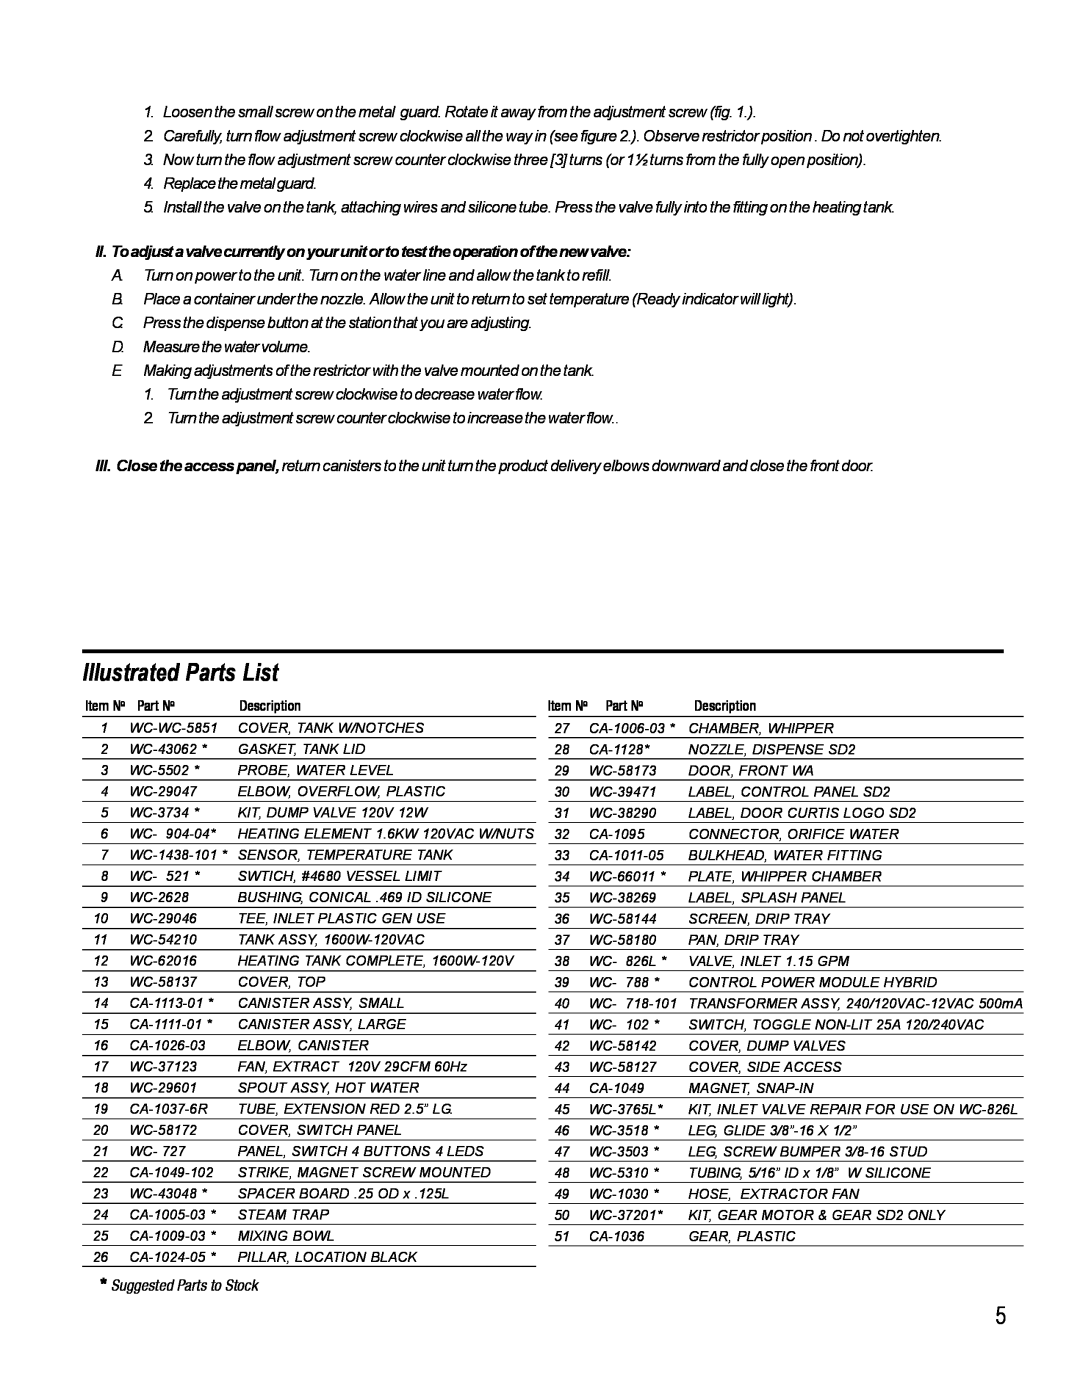 Wibur Curtis Company SD2 specifications Illustrated Parts List 